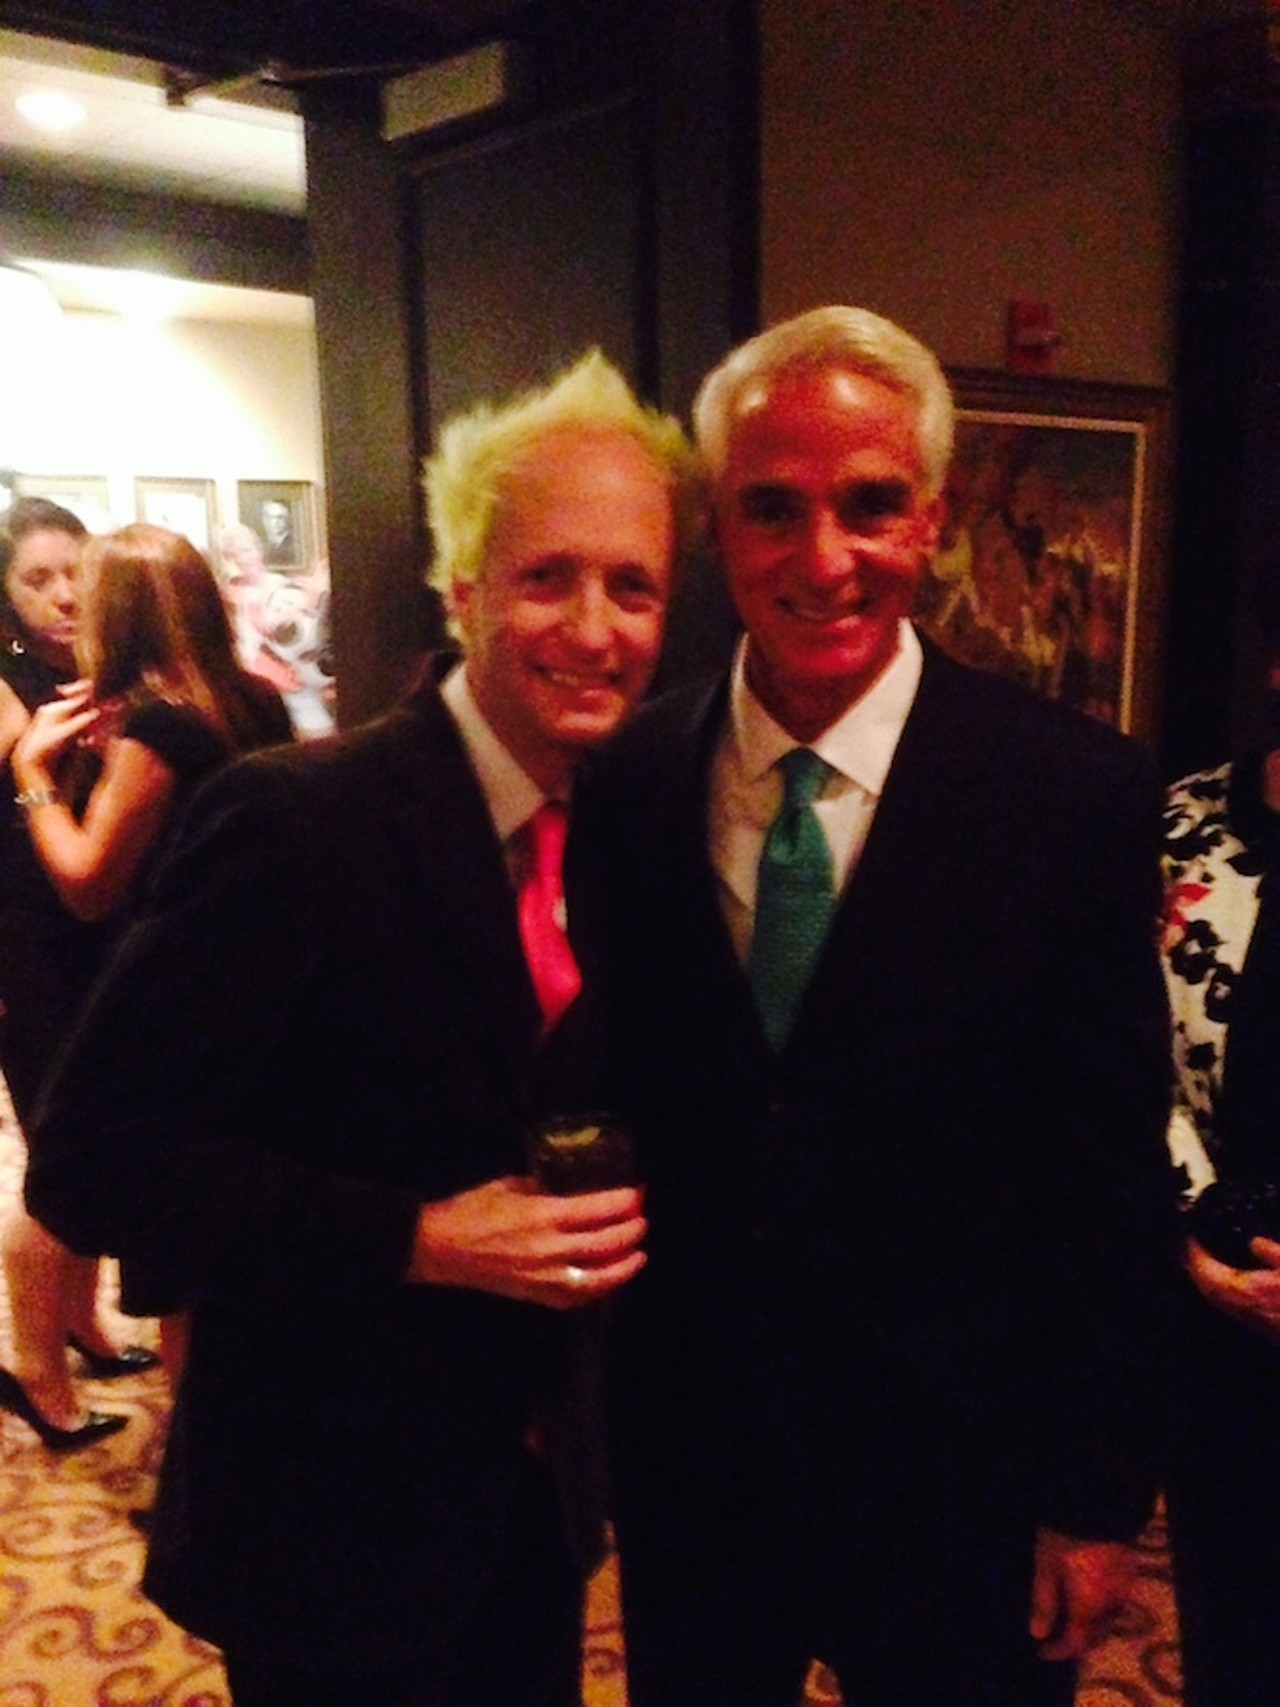 Billy Manes with Charlie Crist at Bob Poe's birthday party at the Grand Bohemian